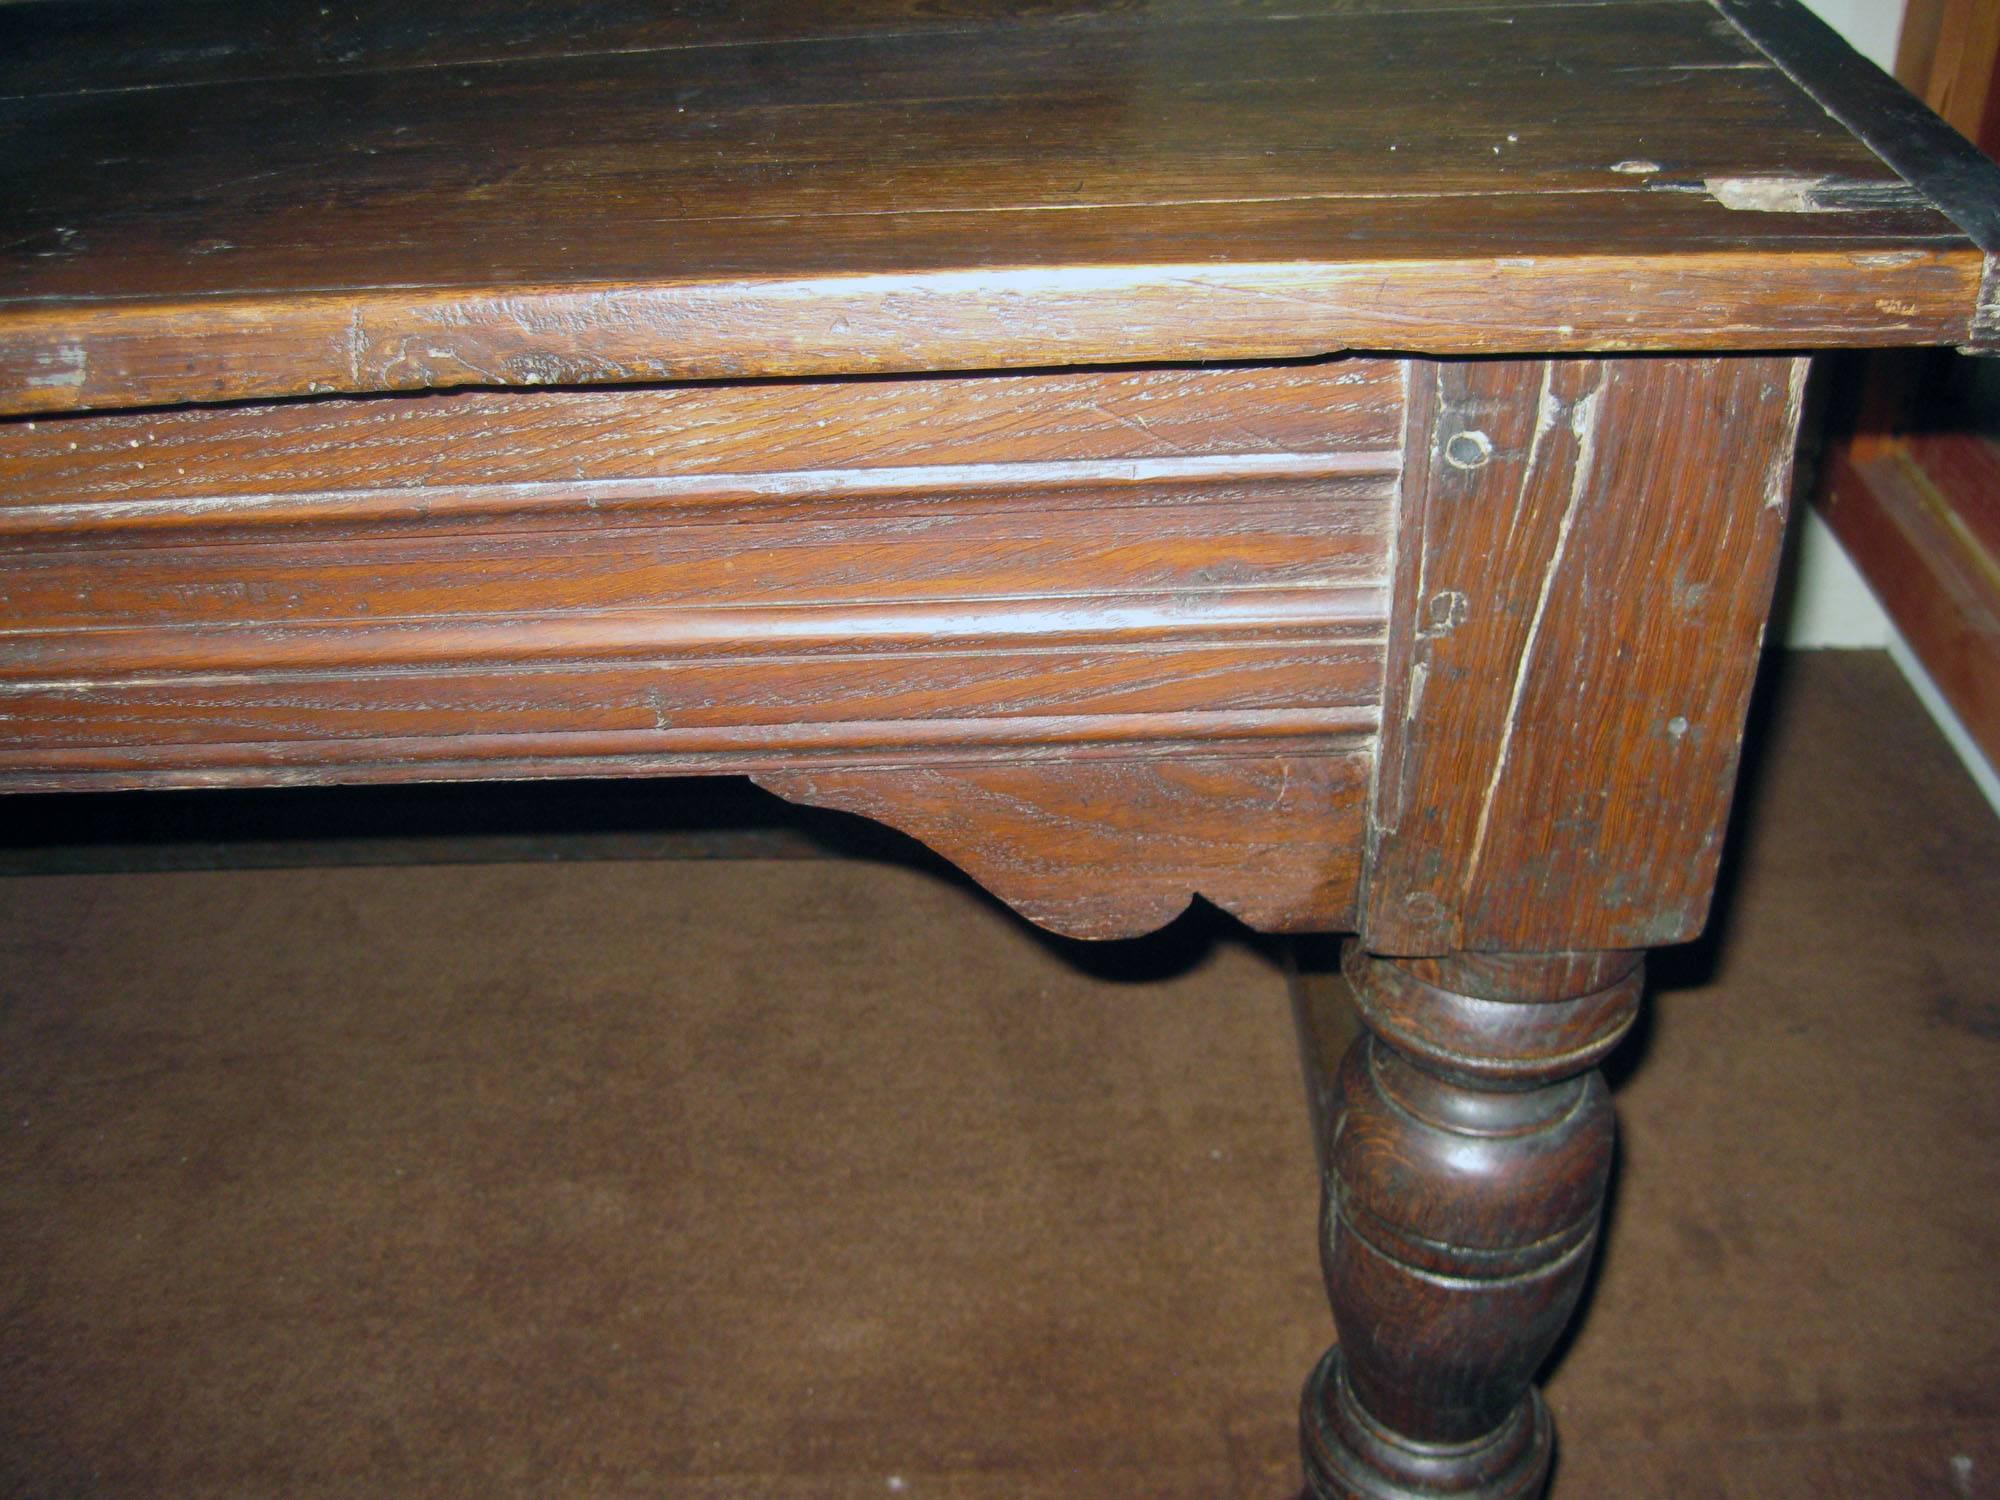 17th century Jacobean English Oak Refectory Table In Good Condition For Sale In Savannah, GA